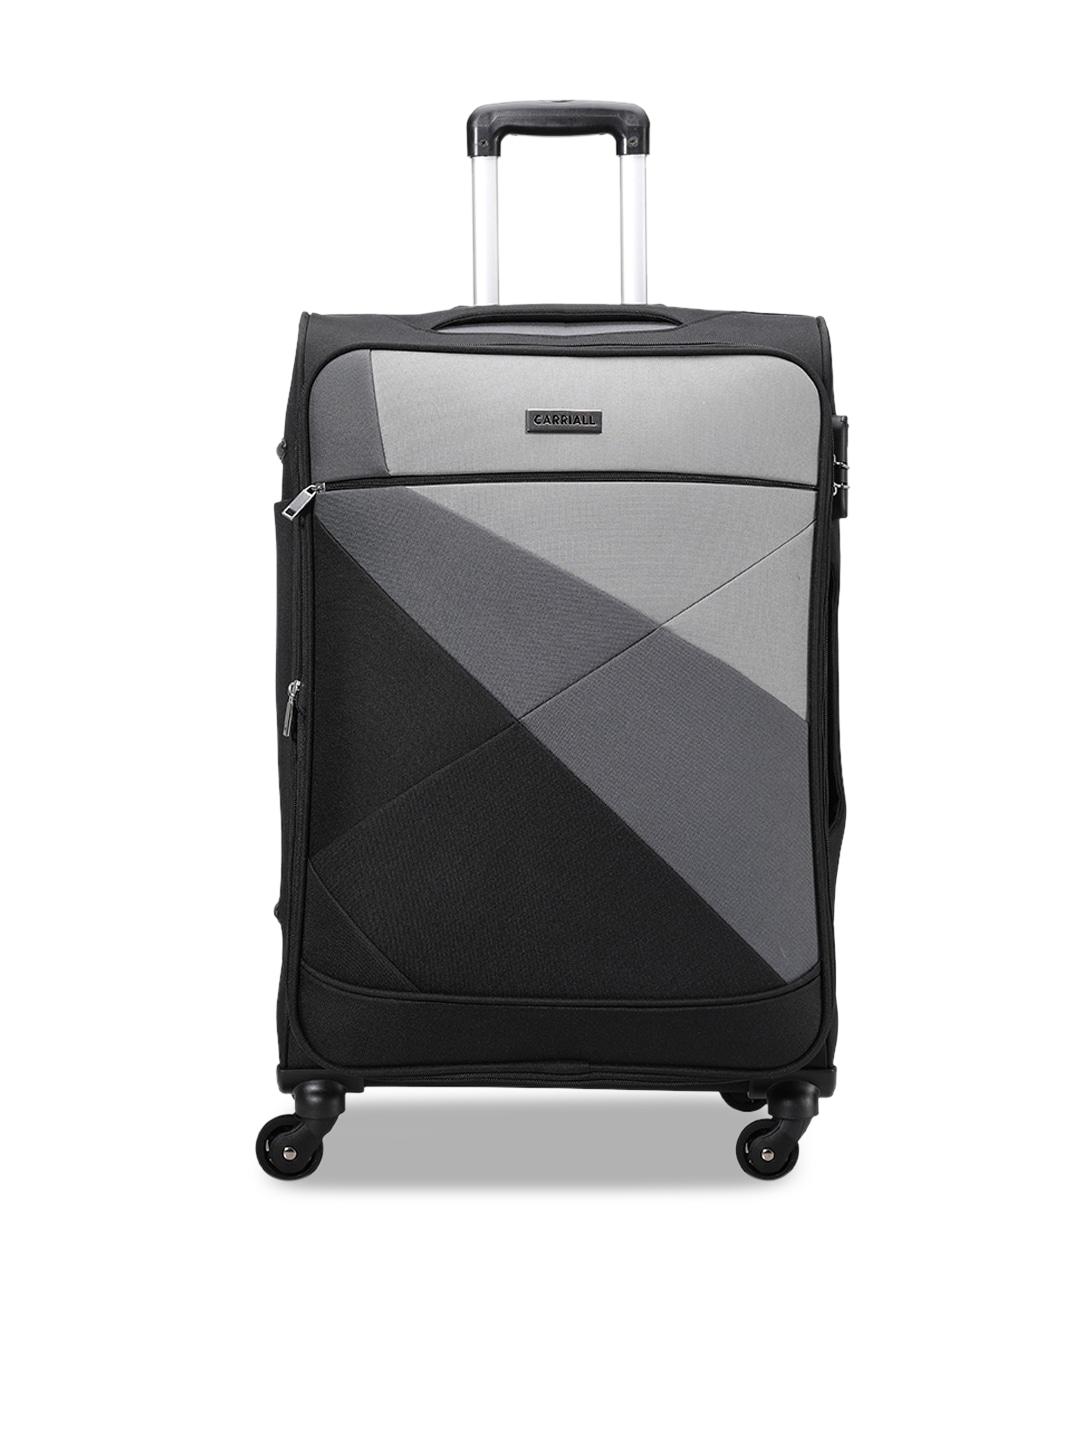 carriall unisex black vista medium-sized check-in trolley suitcase